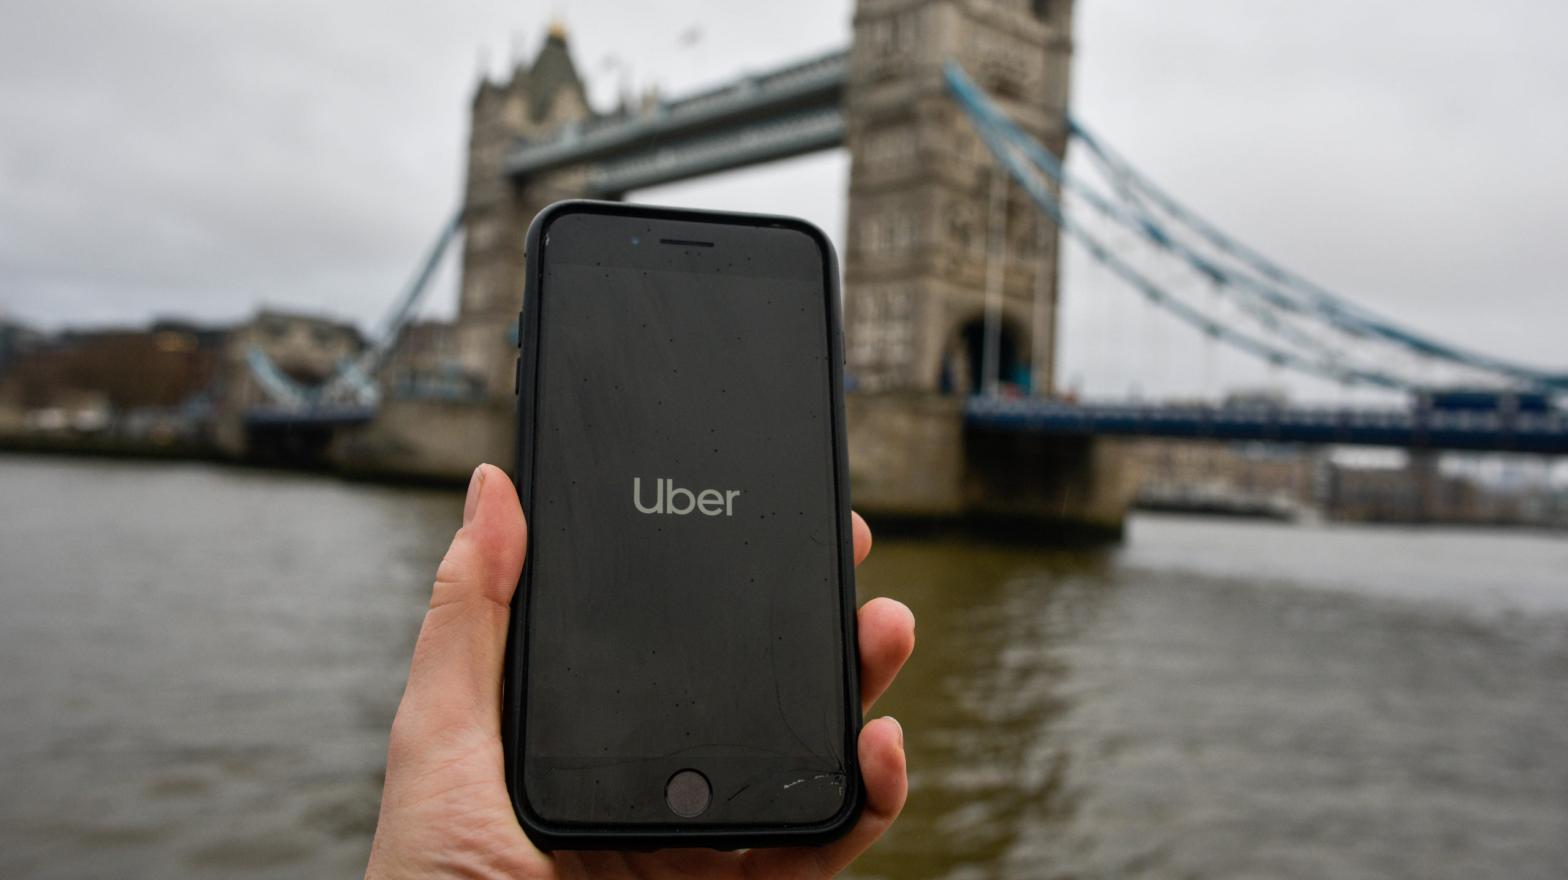 File photo illustration showing the Uber logo on a phone in front of Tower Bridge in London, England.  (Photo: Peter Summers, Getty Images)